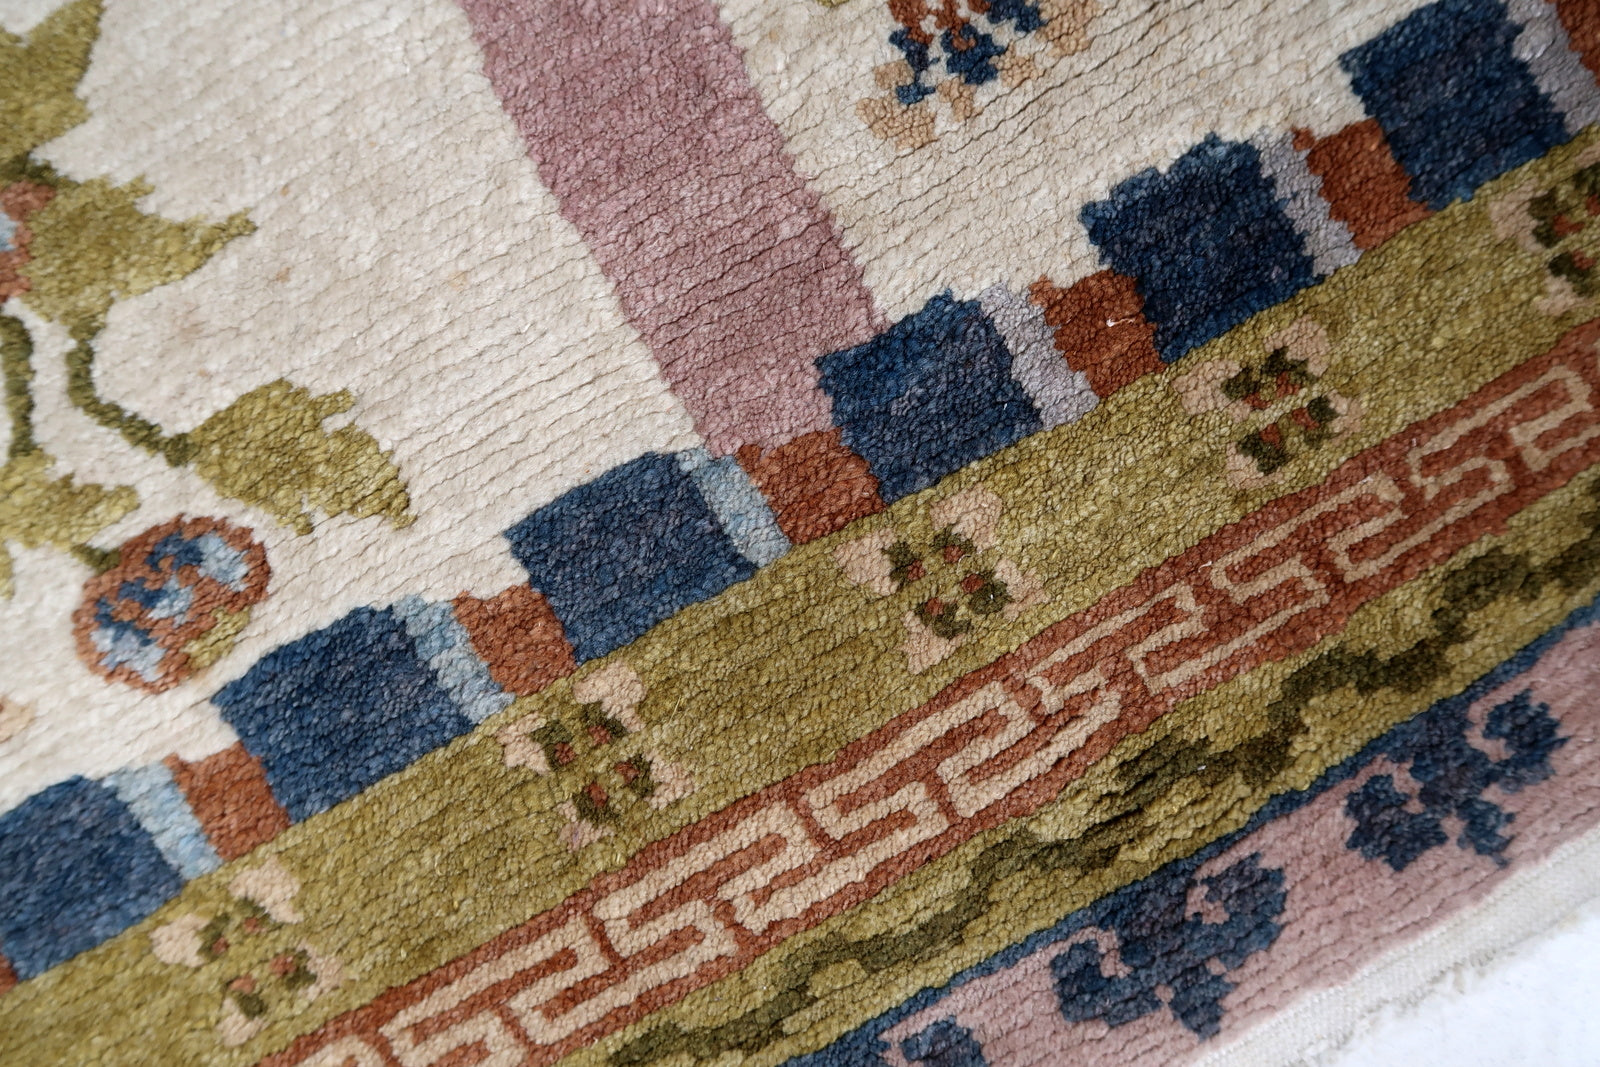 Soft Feel Underfoot Provided by Wool Material on Handmade Vintage Rug - 1970s